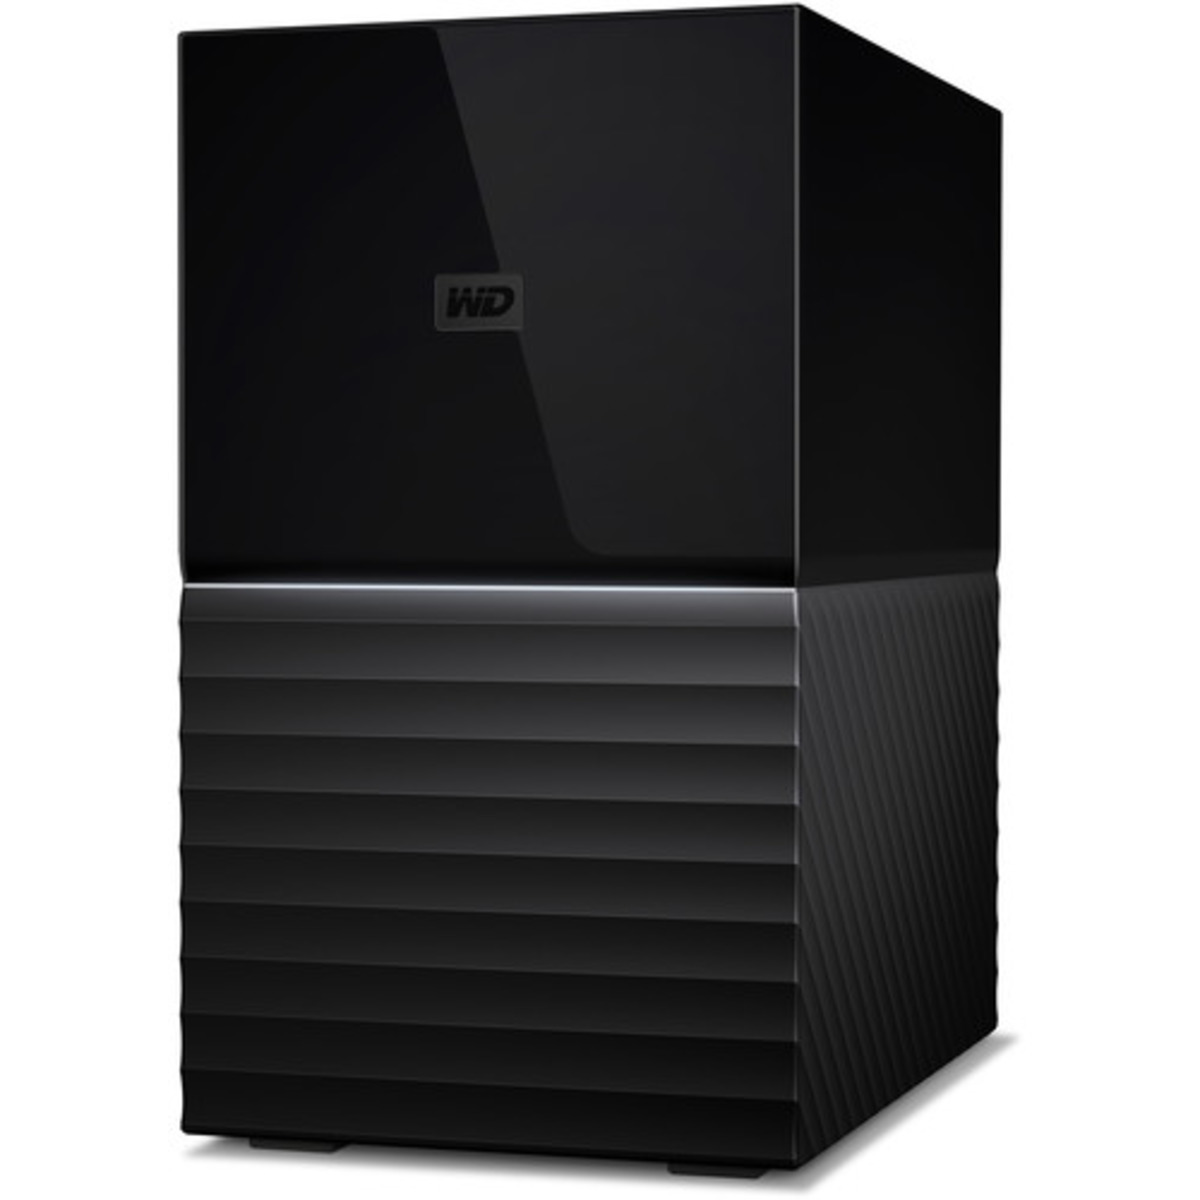 buy $509 Western Digital My Book DUO Gen 2 8tb Desktop DAS - Direct Attached Storage Device 2x4000gb Western Digital Blue WD40EZRZ 3.5 5400rpm SATA 6Gb/s HDD CONSUMER Class Drives Installed - Burn-In Tested - ON SALE - nas headquarters buy network attached storage server device das new raid-5 free shipping usa christmas new year holiday sale My Book DUO Gen 2